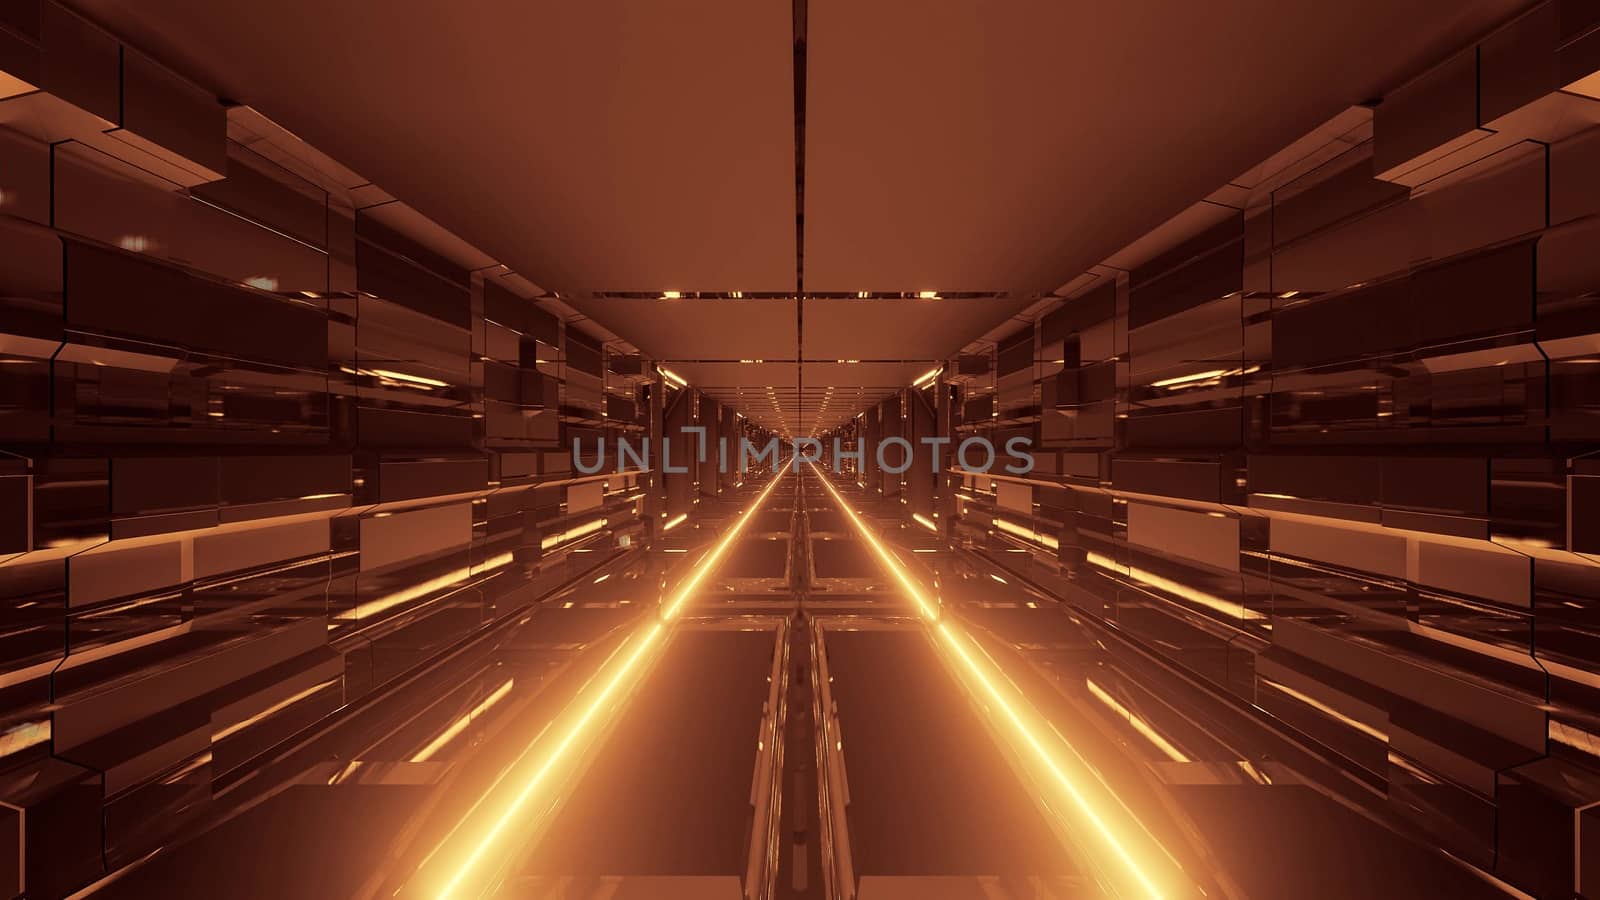 futuristic technical science-fiction tunnel corridor with endless glowing lights 3d illustration background wallpaper graphic artwork, scifi hangar with reflective glass windows 3d rendering design